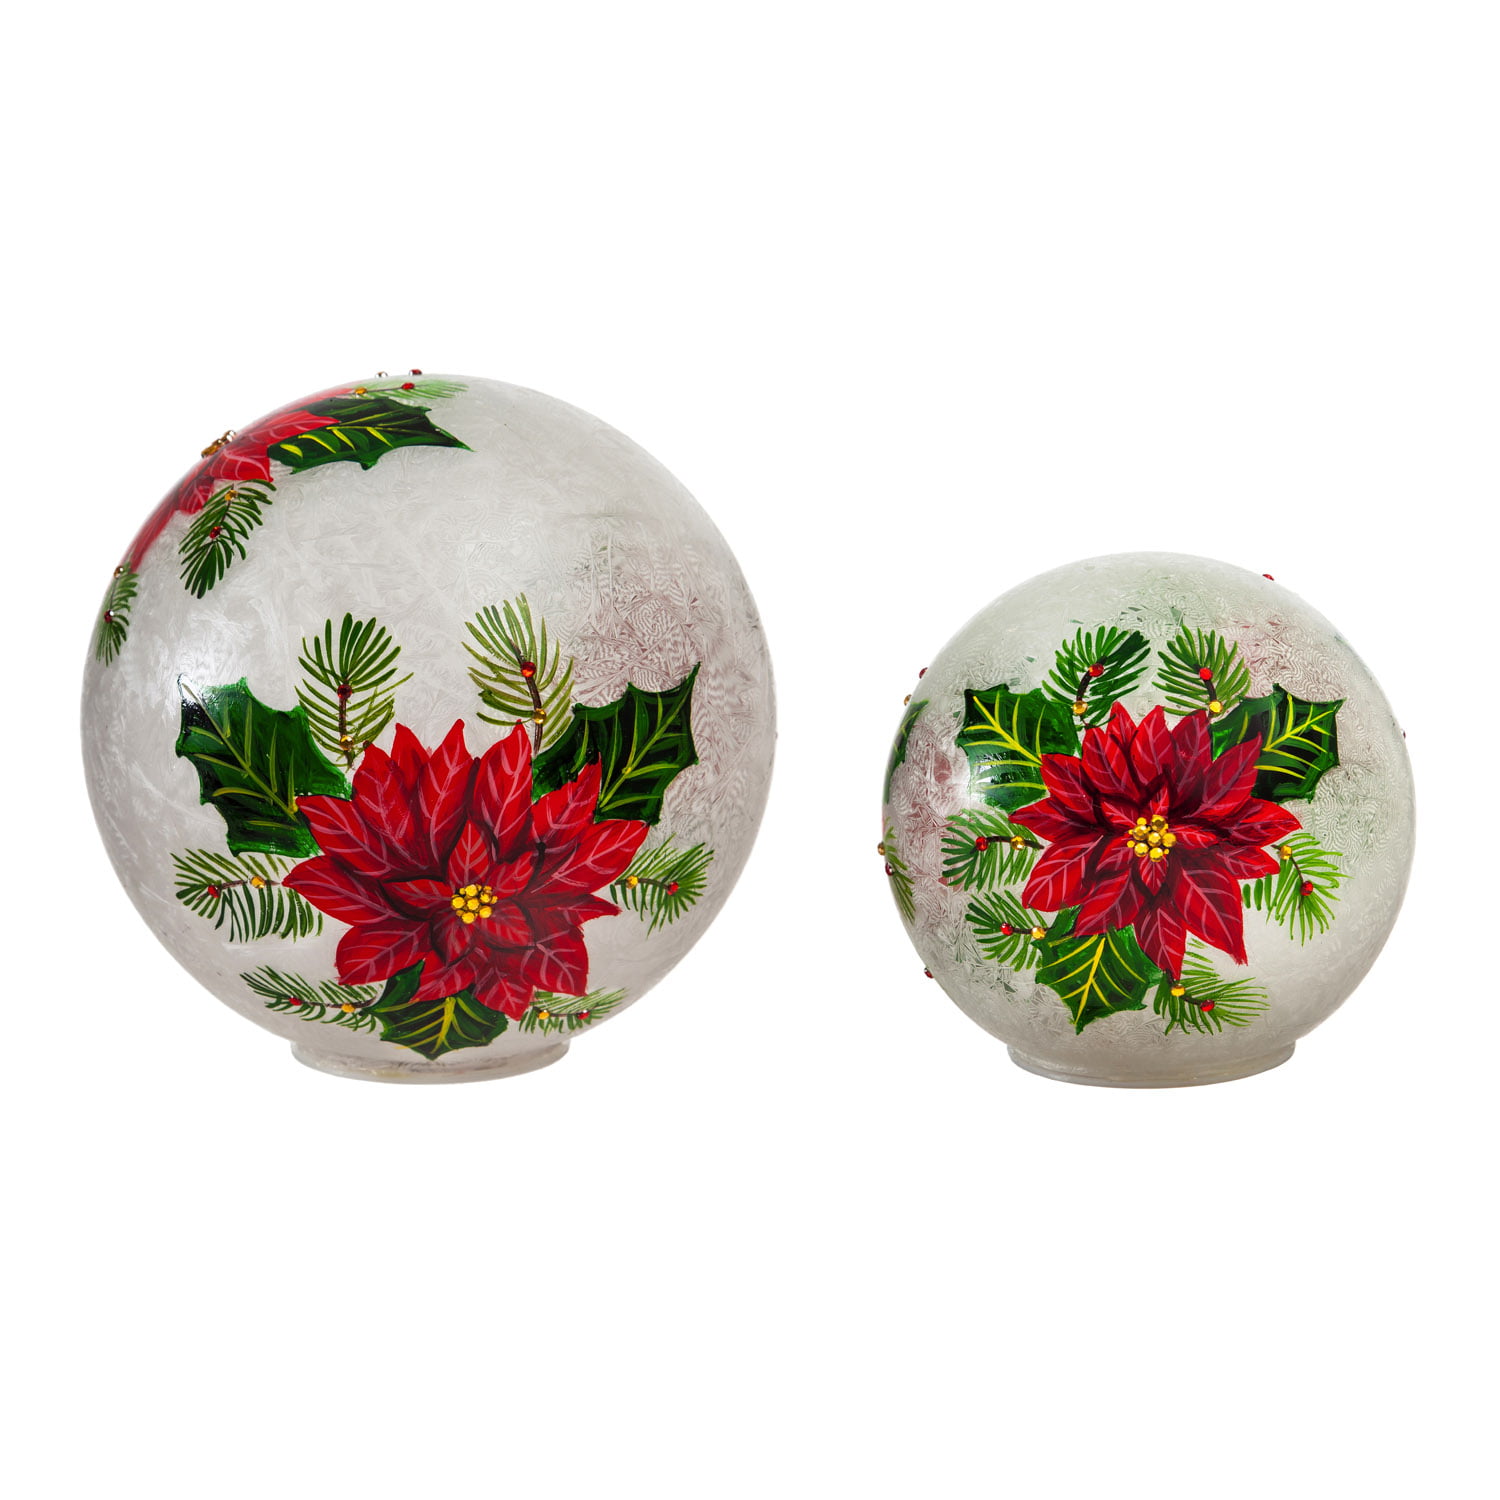 American Atelier At Home 3” Ceramic Orbs Set of 6 Decorative Balls Floral Green 